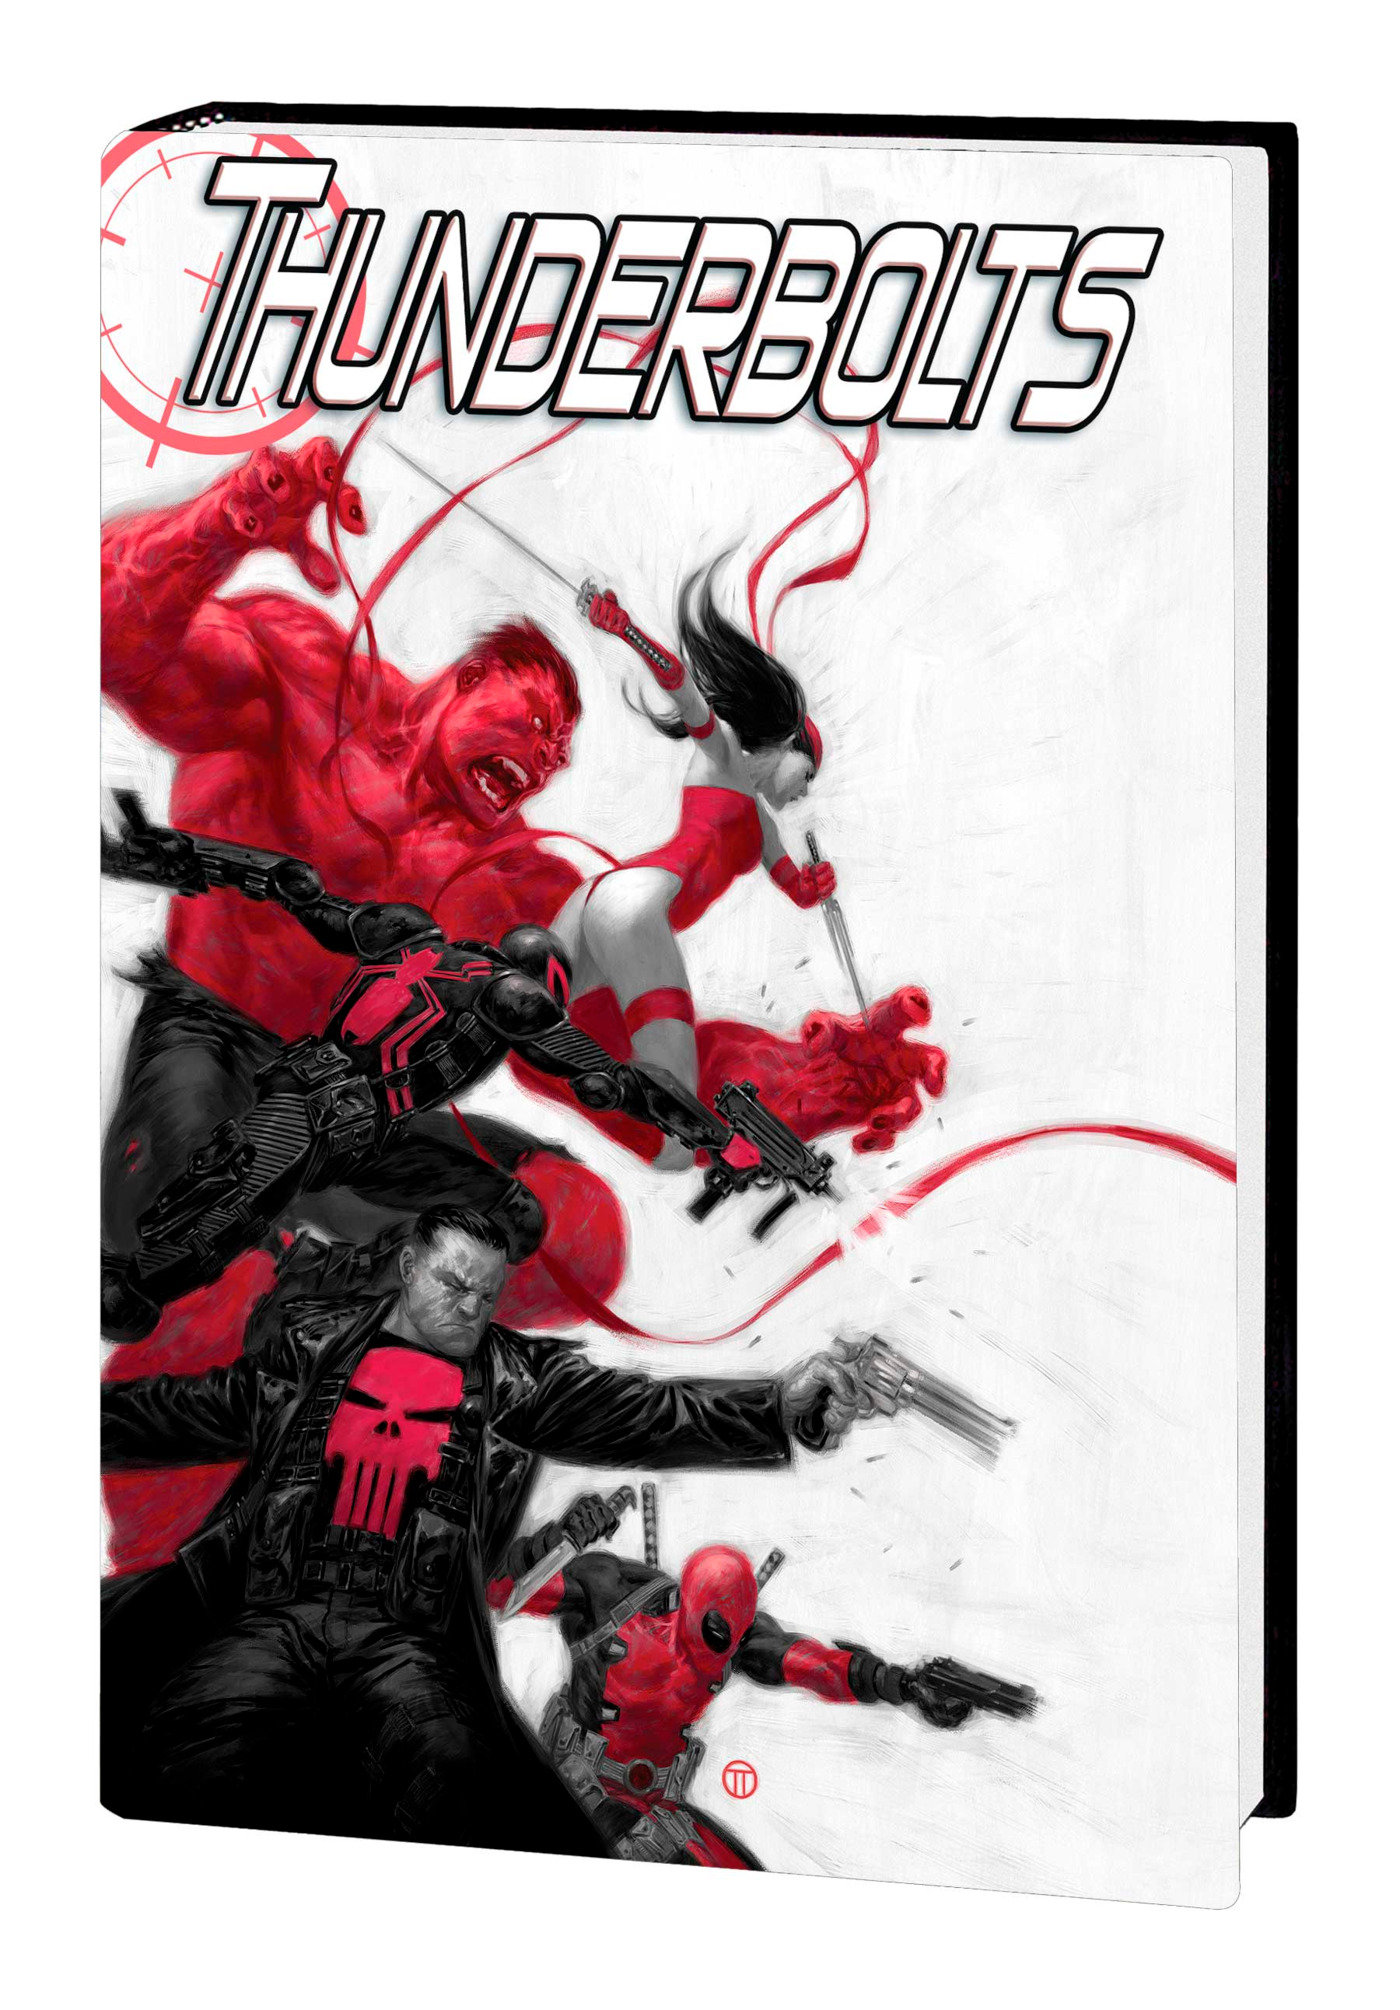 Thunderbolts Red Omnibus Hardcover Graphic Novel Volume 1 (Direct Market Edition)